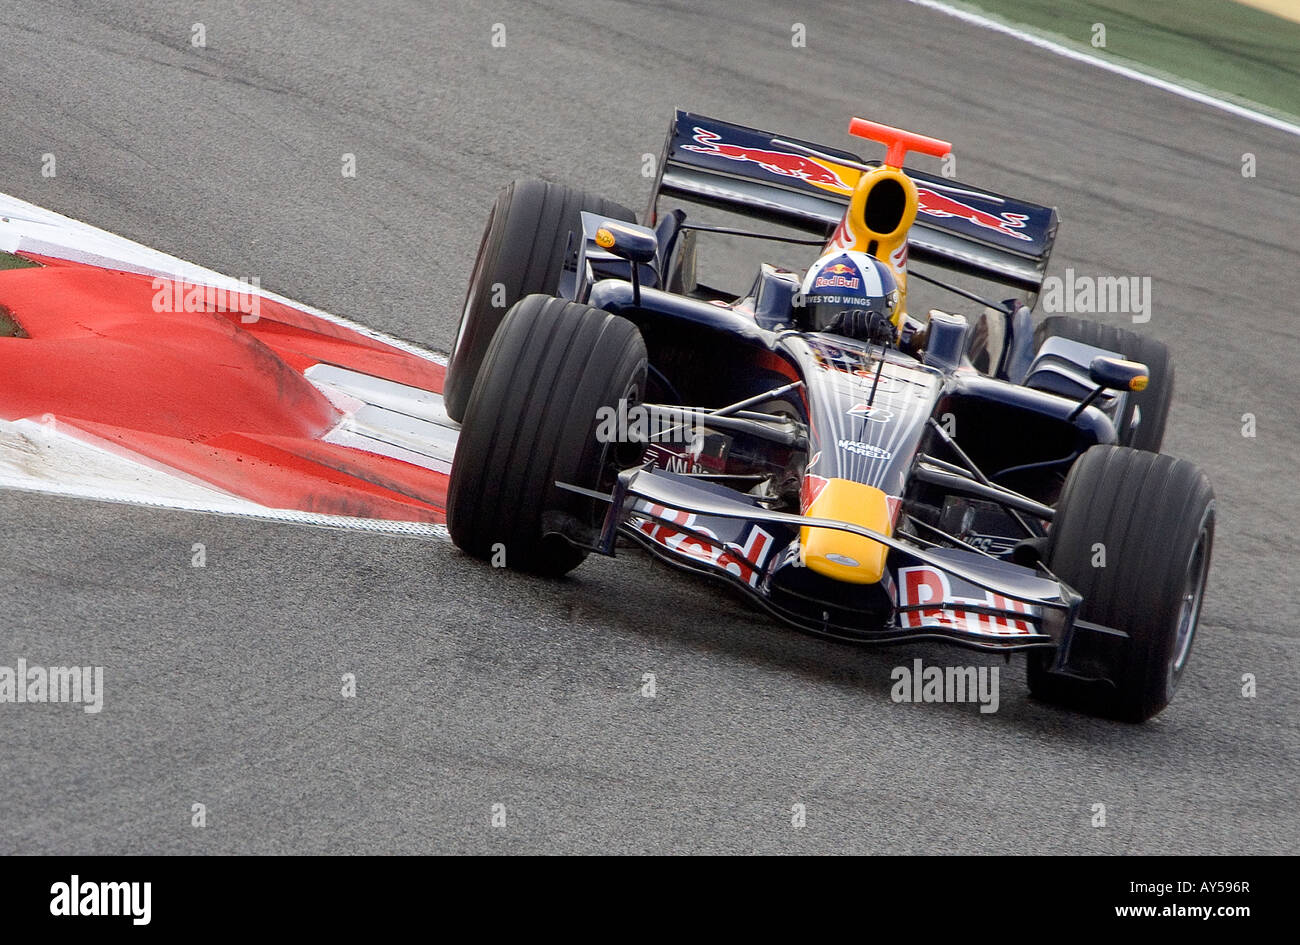 David Coulthard driving for the Red Bull-Renault Formula One team Stock Photo